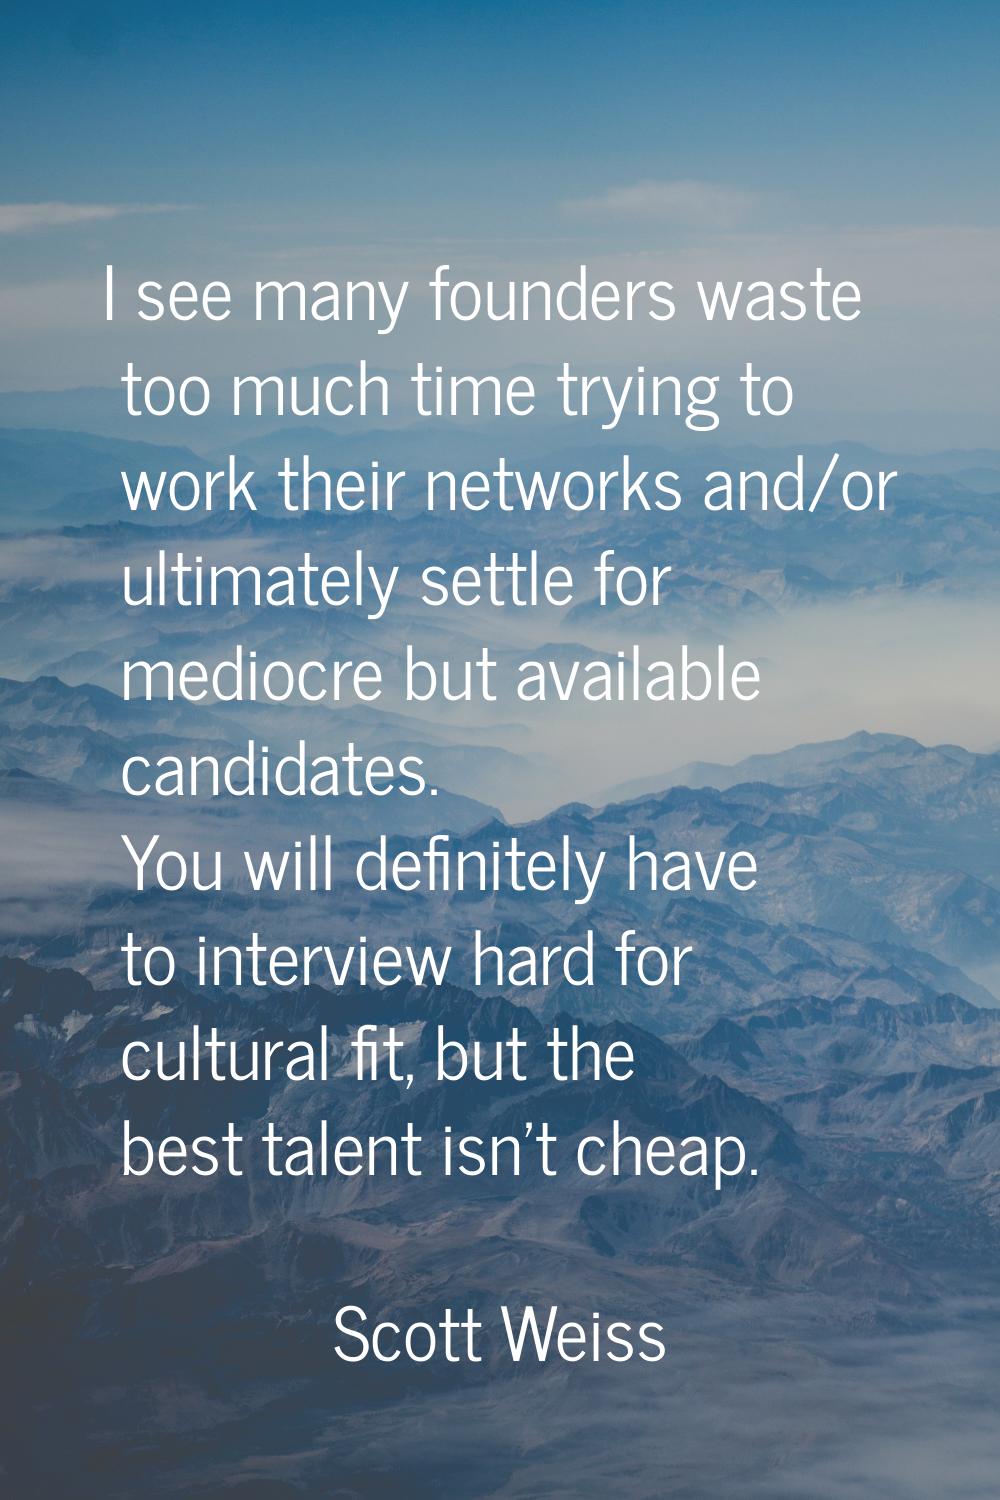 I see many founders waste too much time trying to work their networks and/or ultimately settle for 